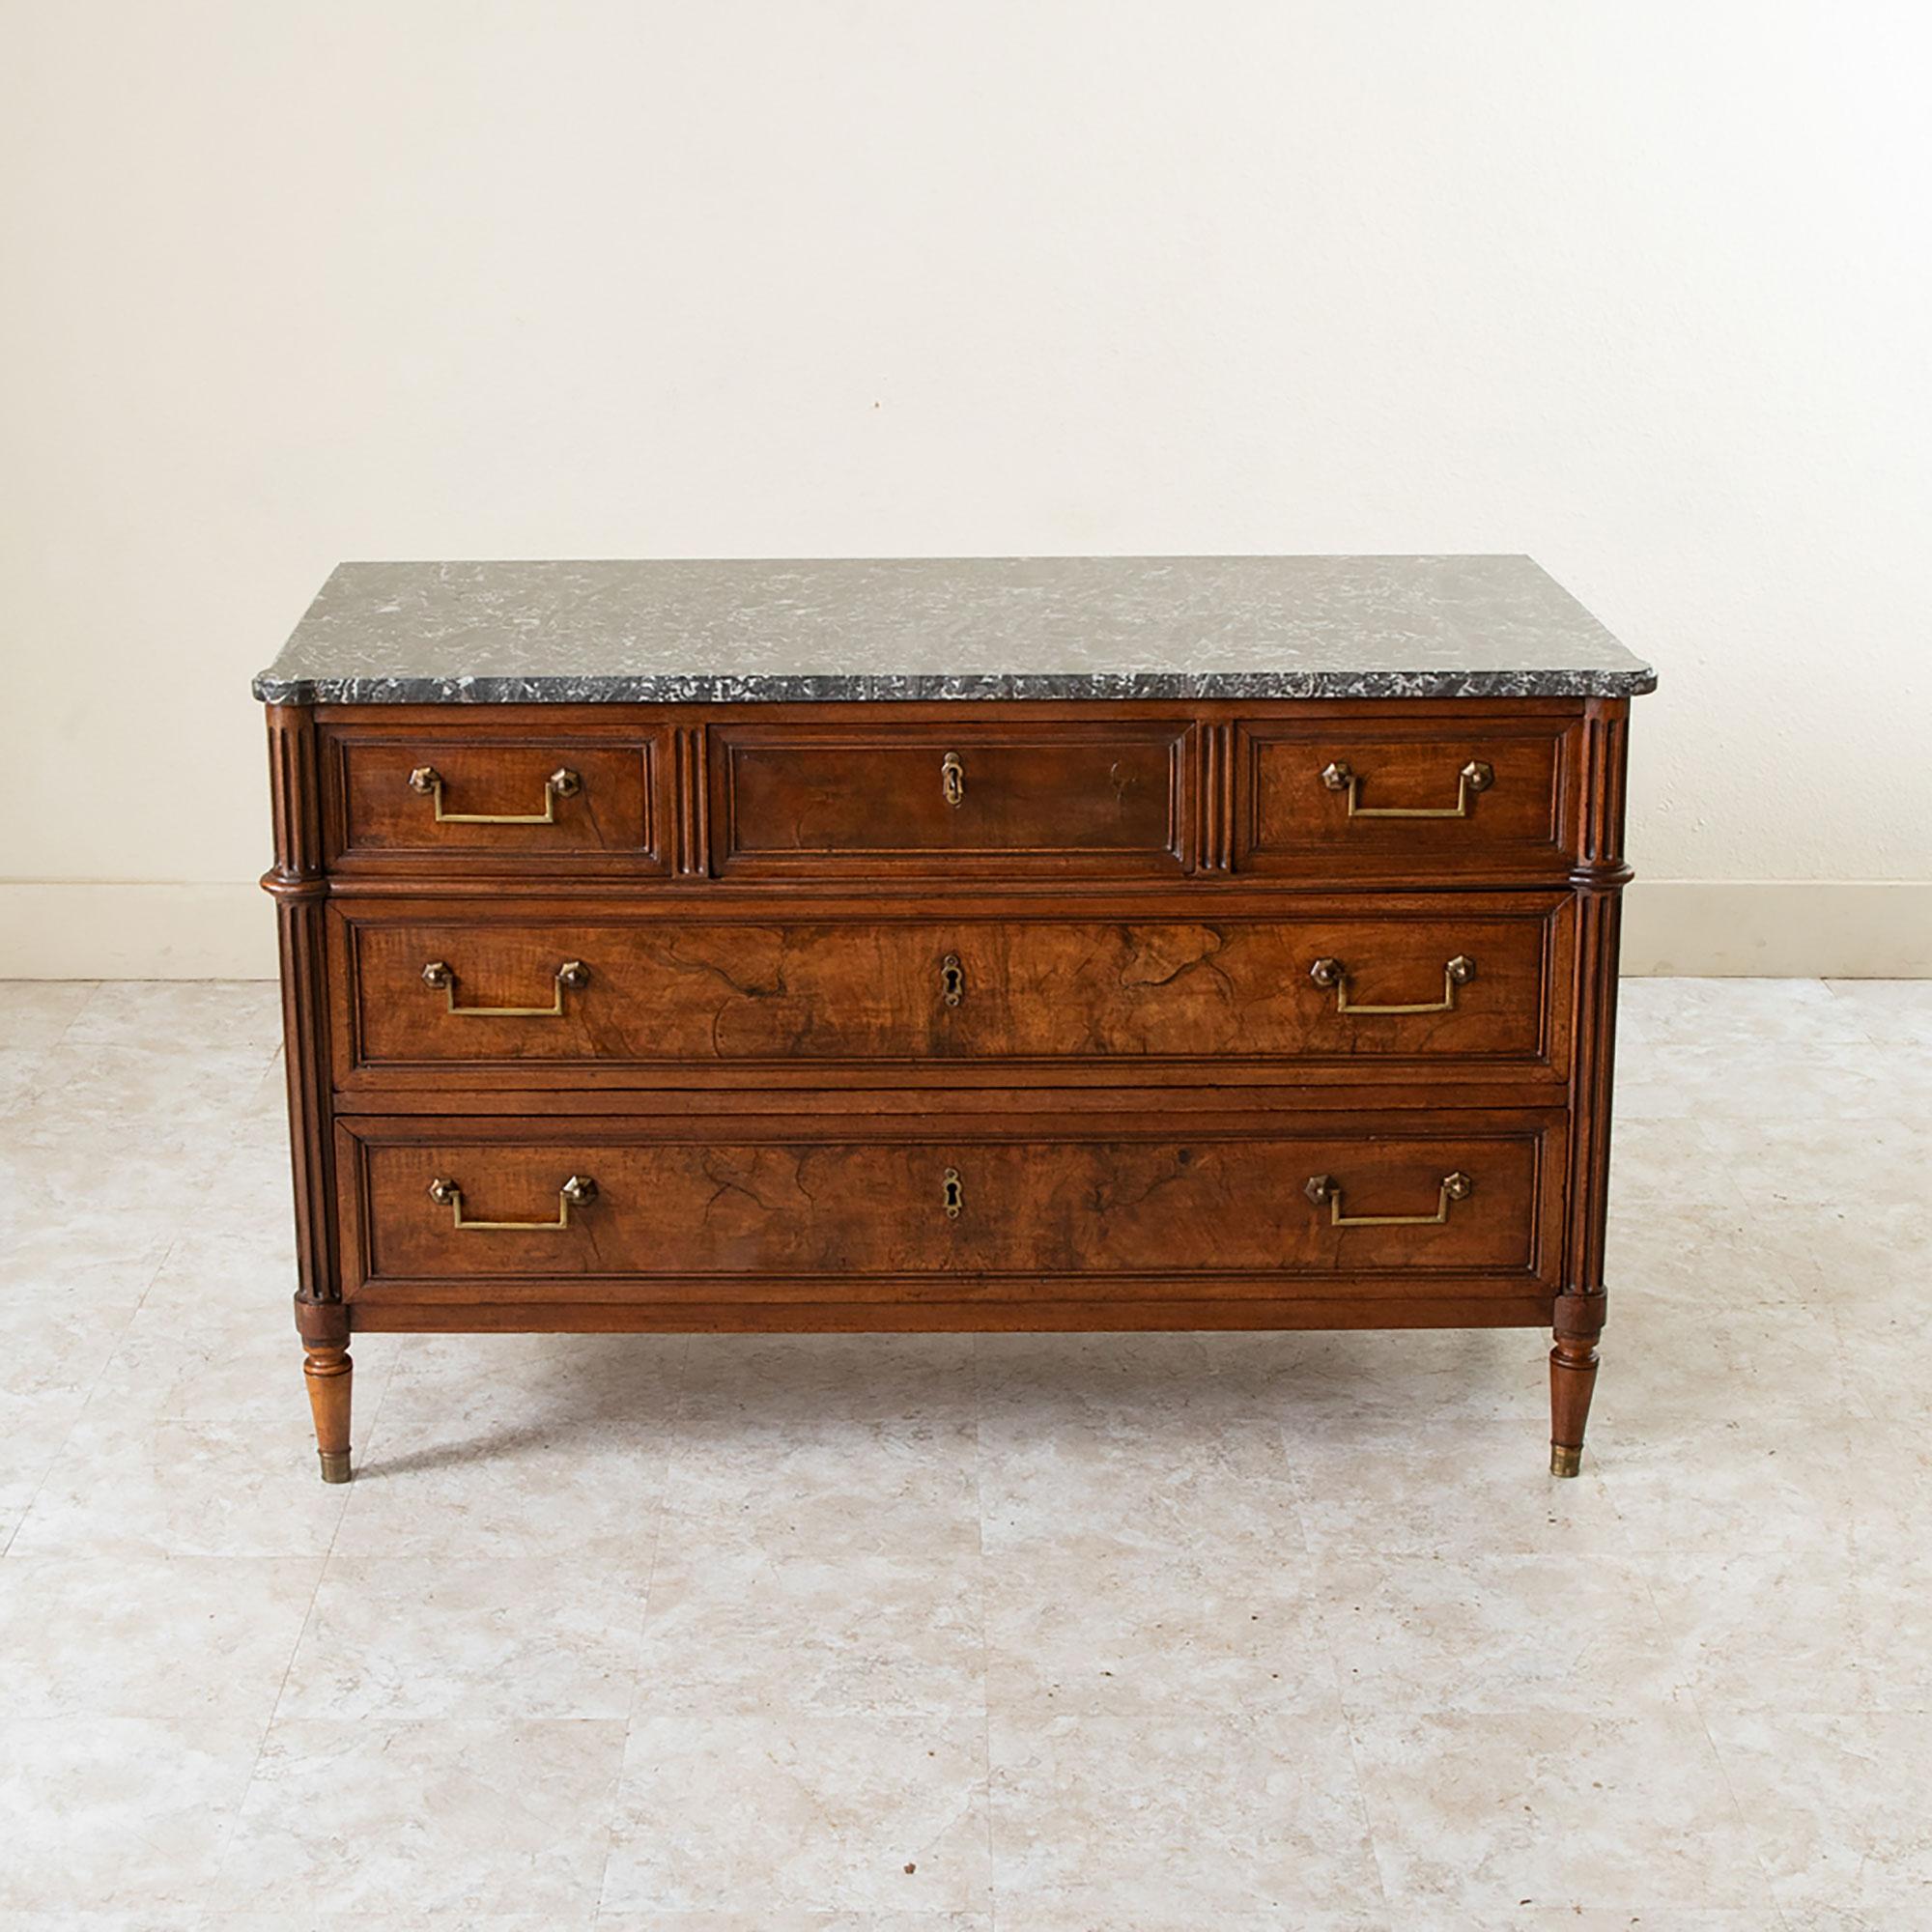 This mid nineteenth century French Louis XVI style walnut commode or chest of drawers features a beveled Saint Anne marble top and fluted rounded corners. Its five drawers of dovetail construction are fitted with classic bronze squared drop handle